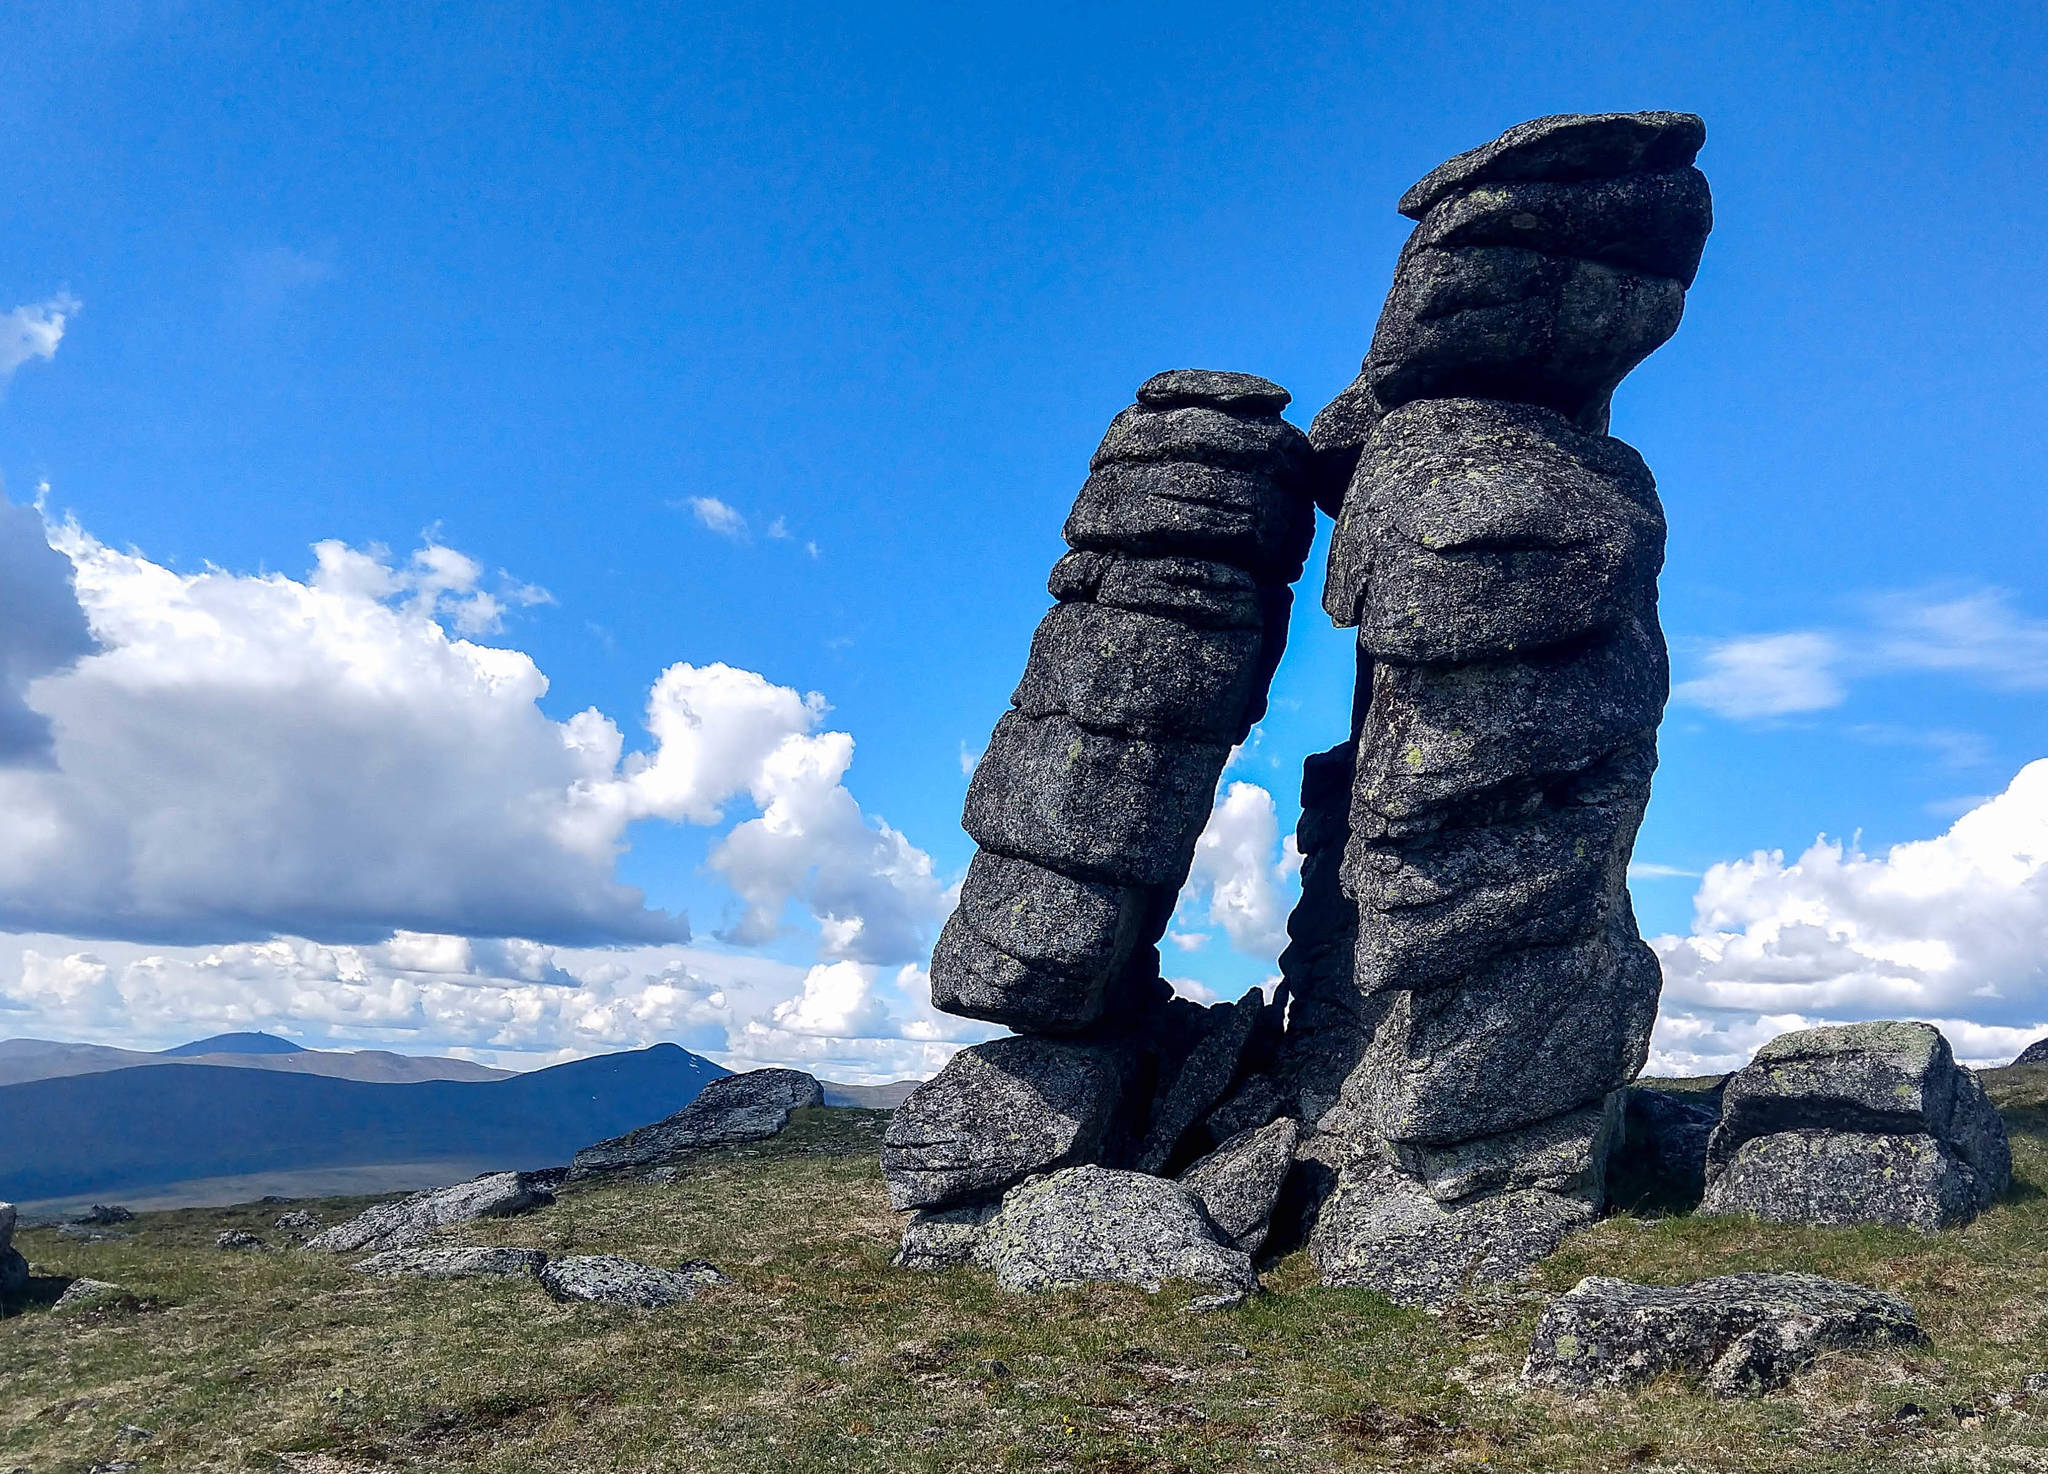 Granite tors tower in front of blue skies near Mount Prindle in Interior Alaska. (Courtesy Photo | Jay Cable)